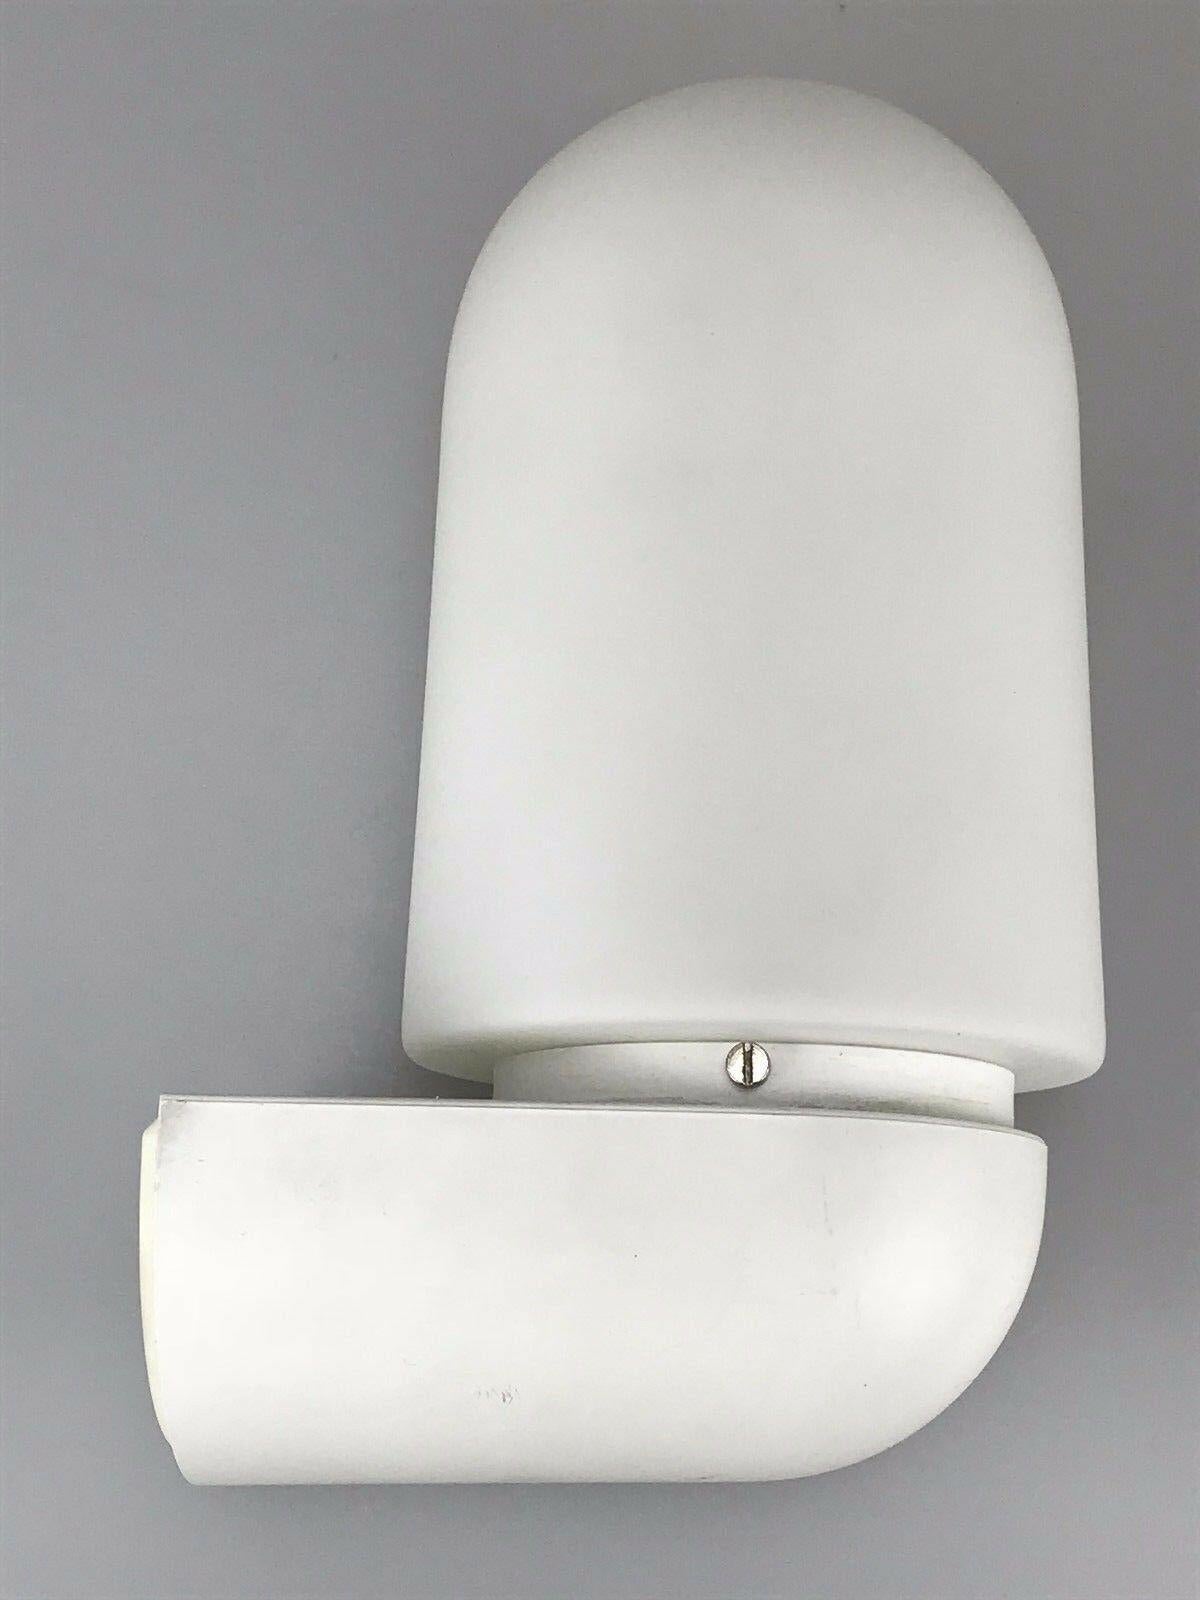 60s 70s Lamp Light Wall Lamp Wall Sconce Limburg Space Age Design In Good Condition For Sale In Neuenkirchen, NI